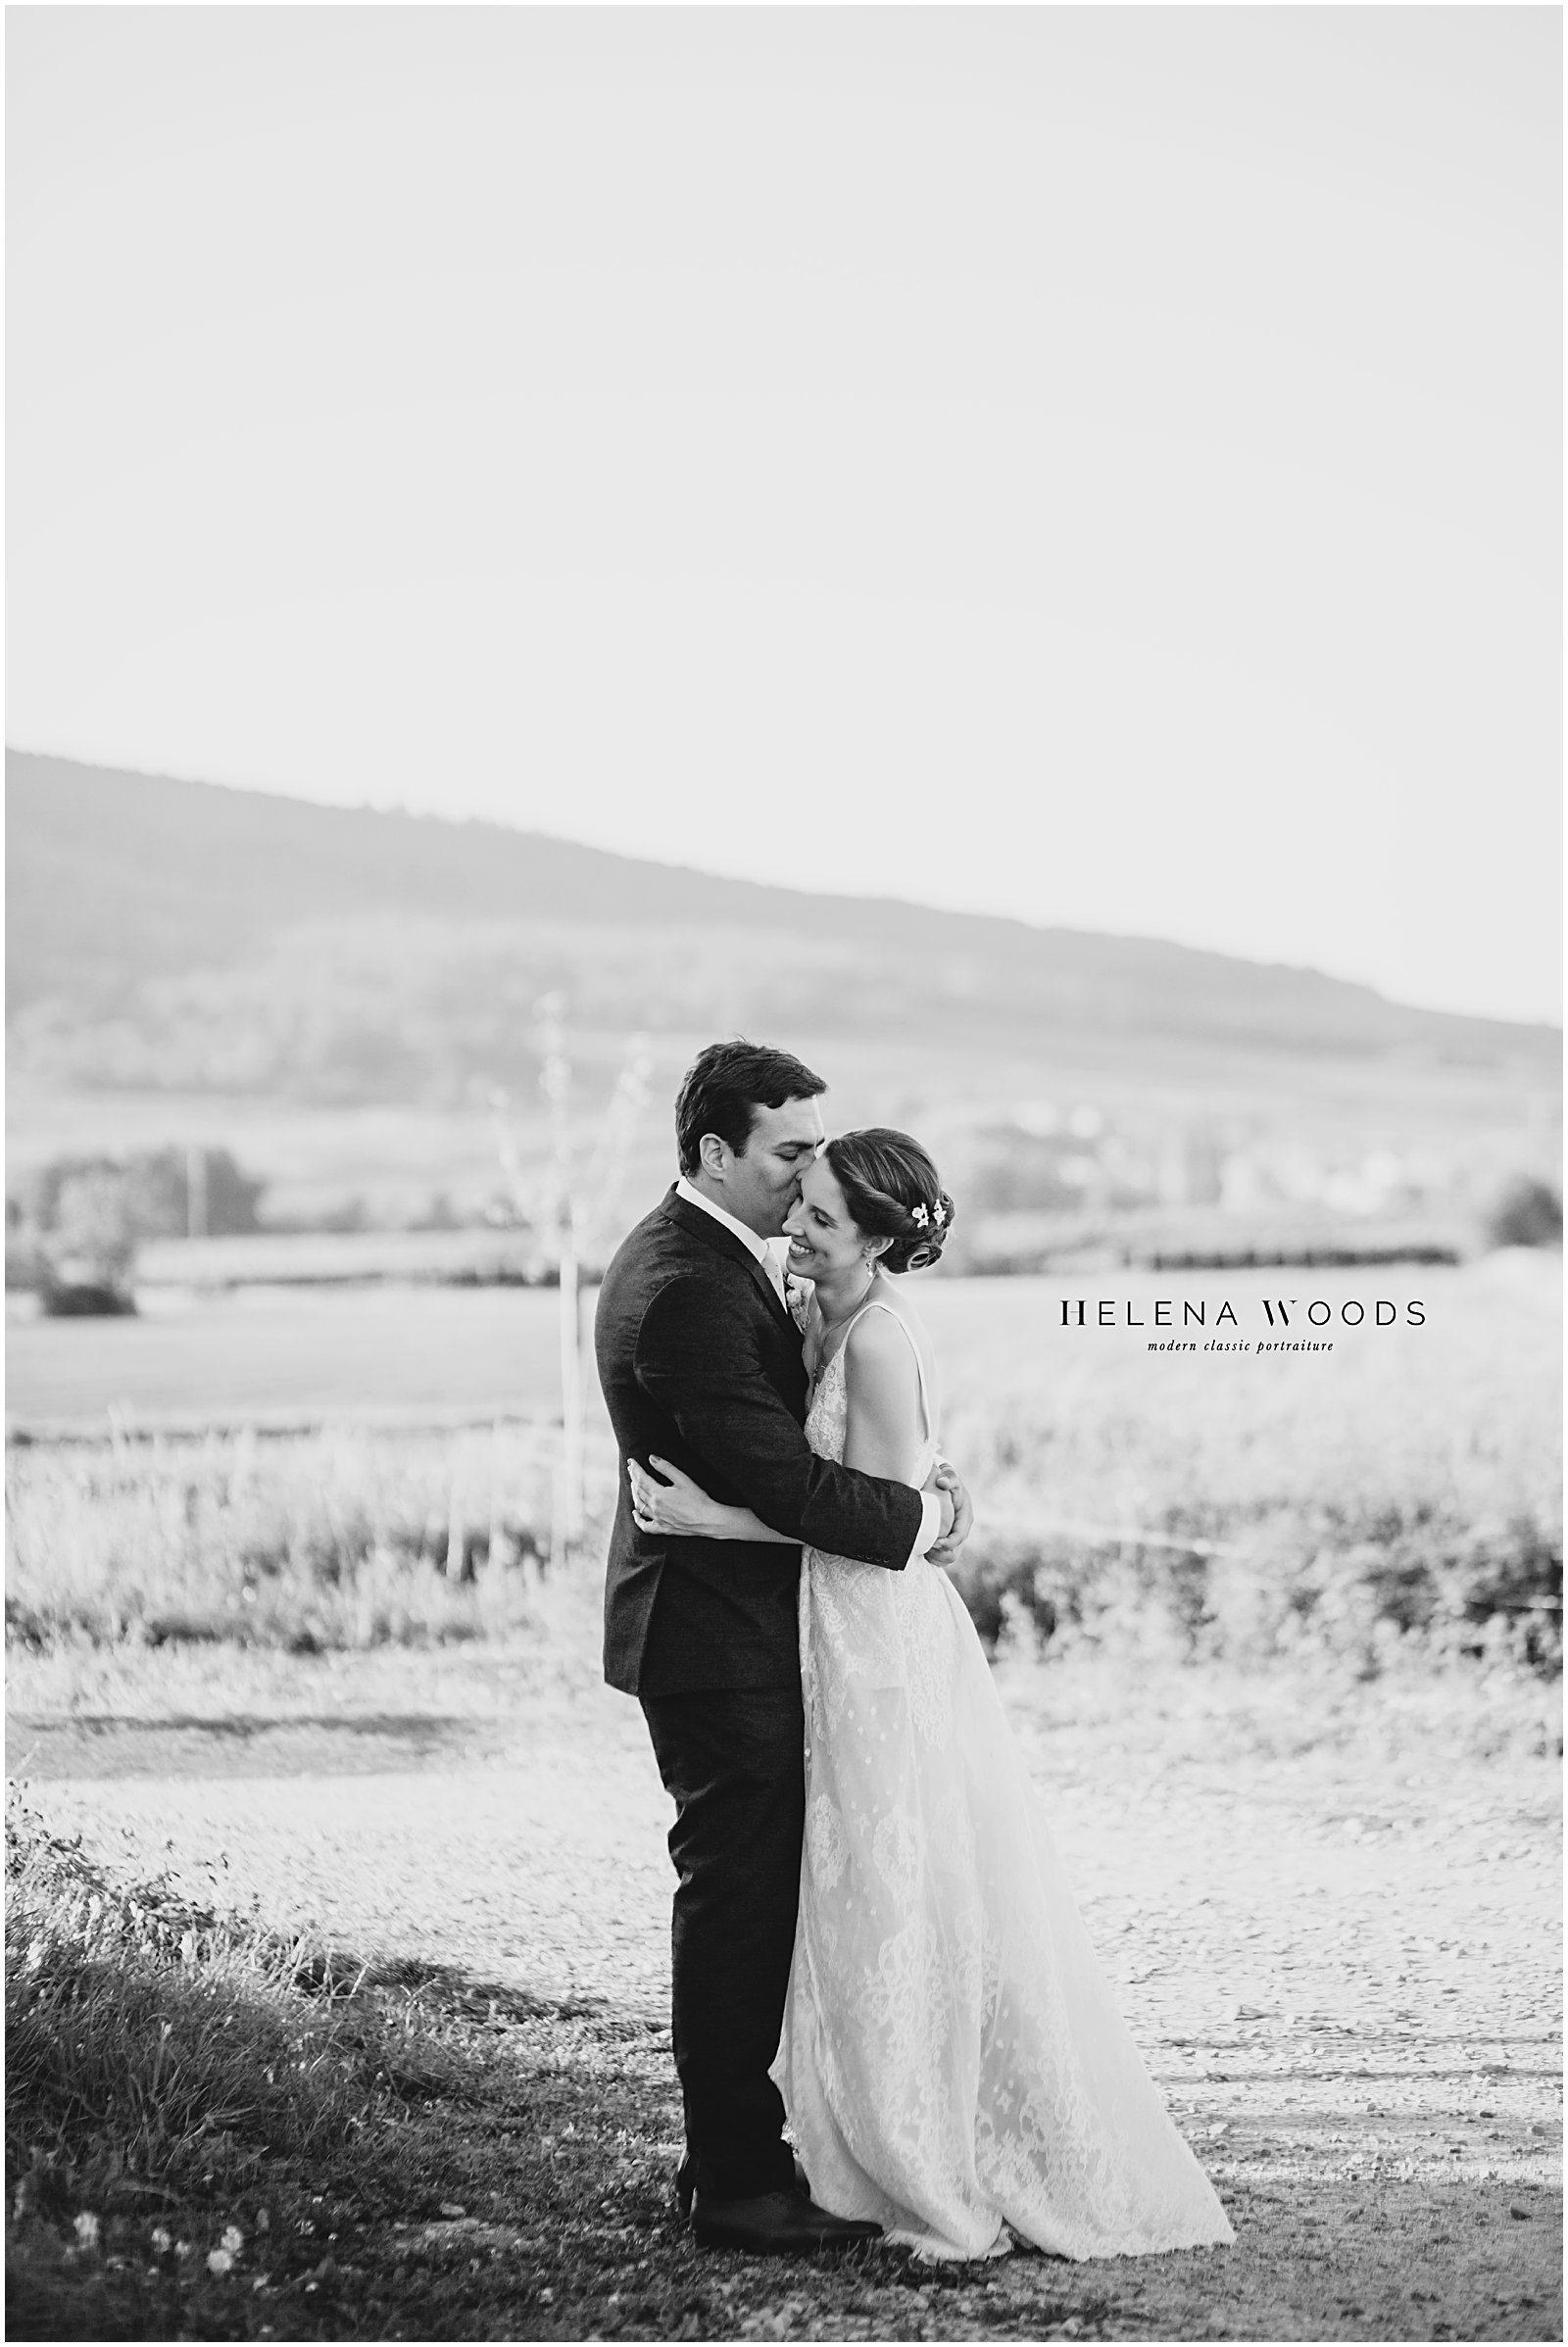 bridal portraits at Achilles Domaine vineyards photographed by wedding photographer Helena Woods